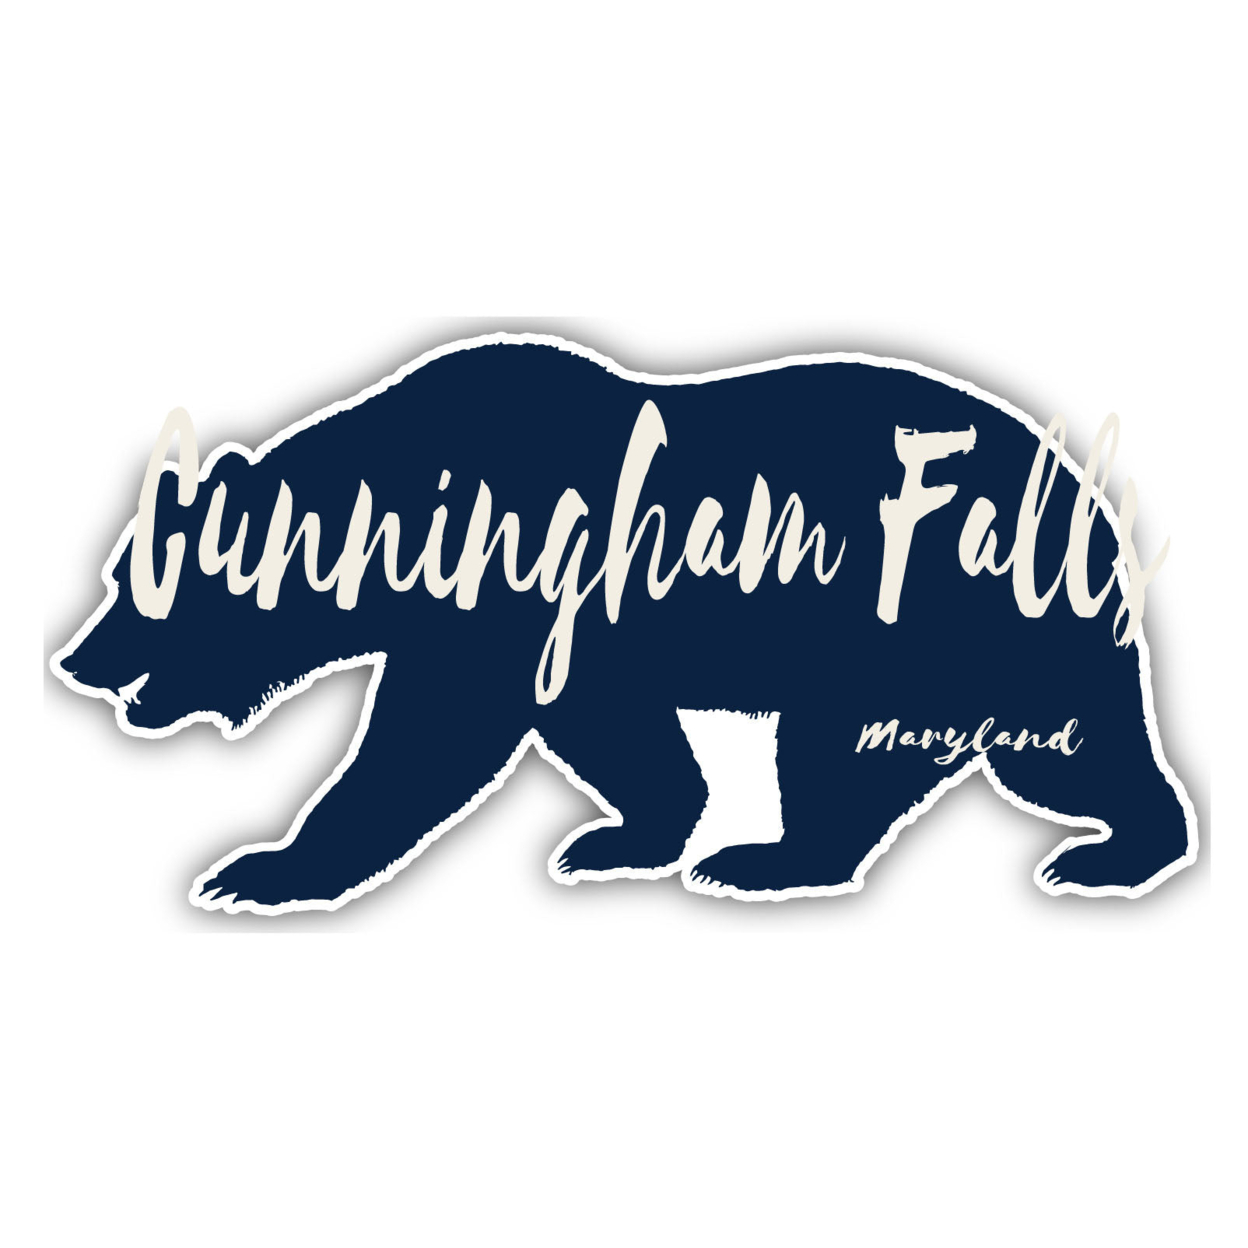 Cunningham Falls Maryland Souvenir Decorative Stickers (Choose Theme And Size) - Single Unit, 10-Inch, Bear